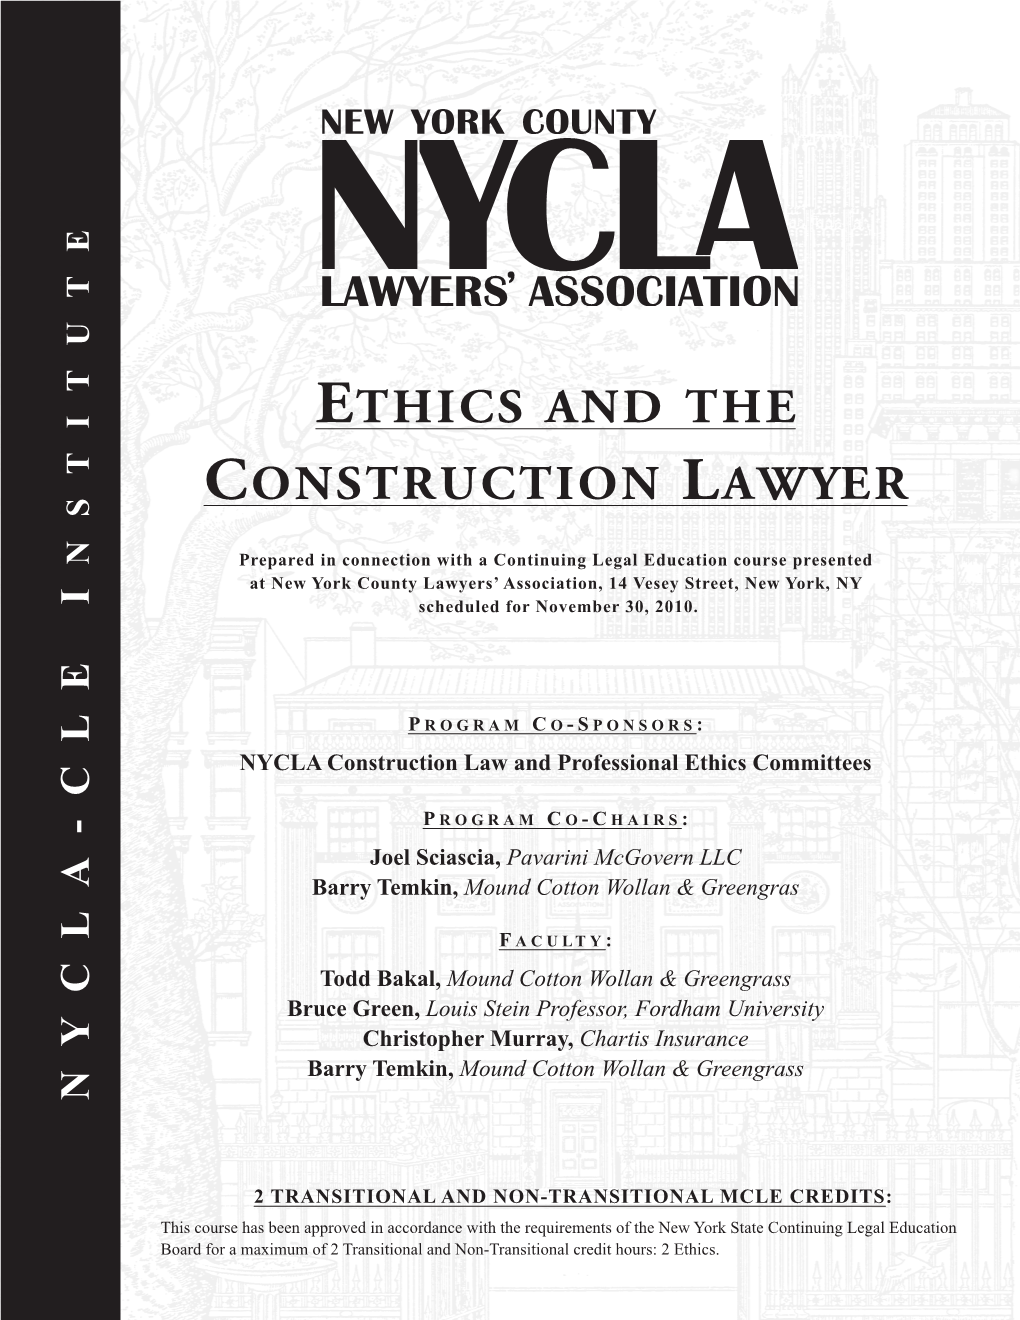 Ethics and the Construction Lawyer November 30, 2010 6:00PM to 9:00PM